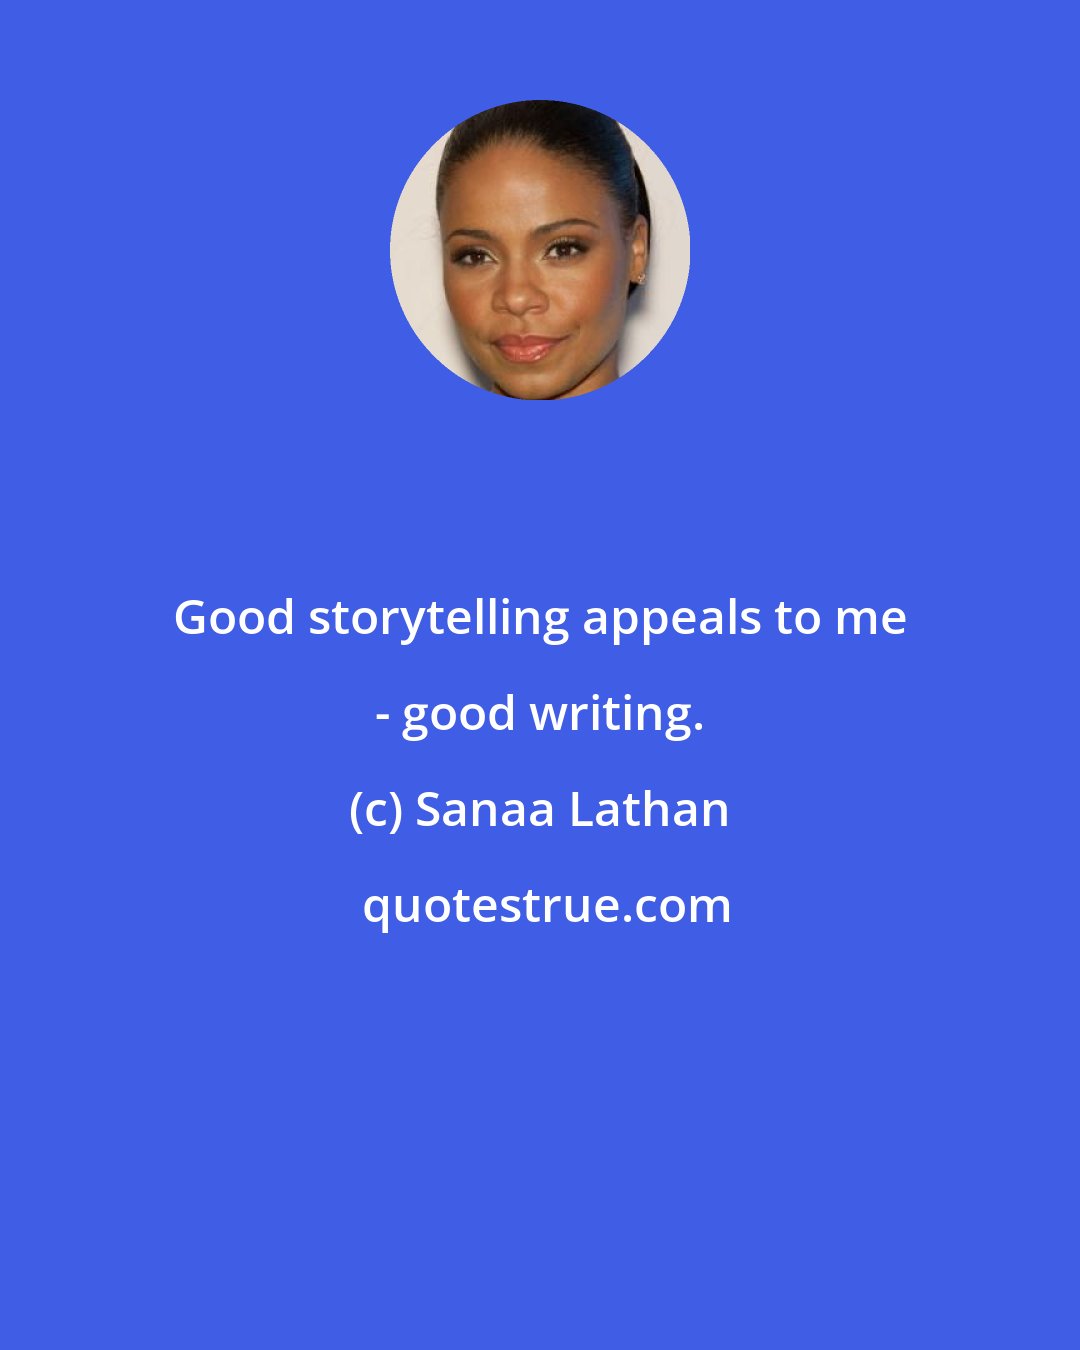 Sanaa Lathan: Good storytelling appeals to me - good writing.